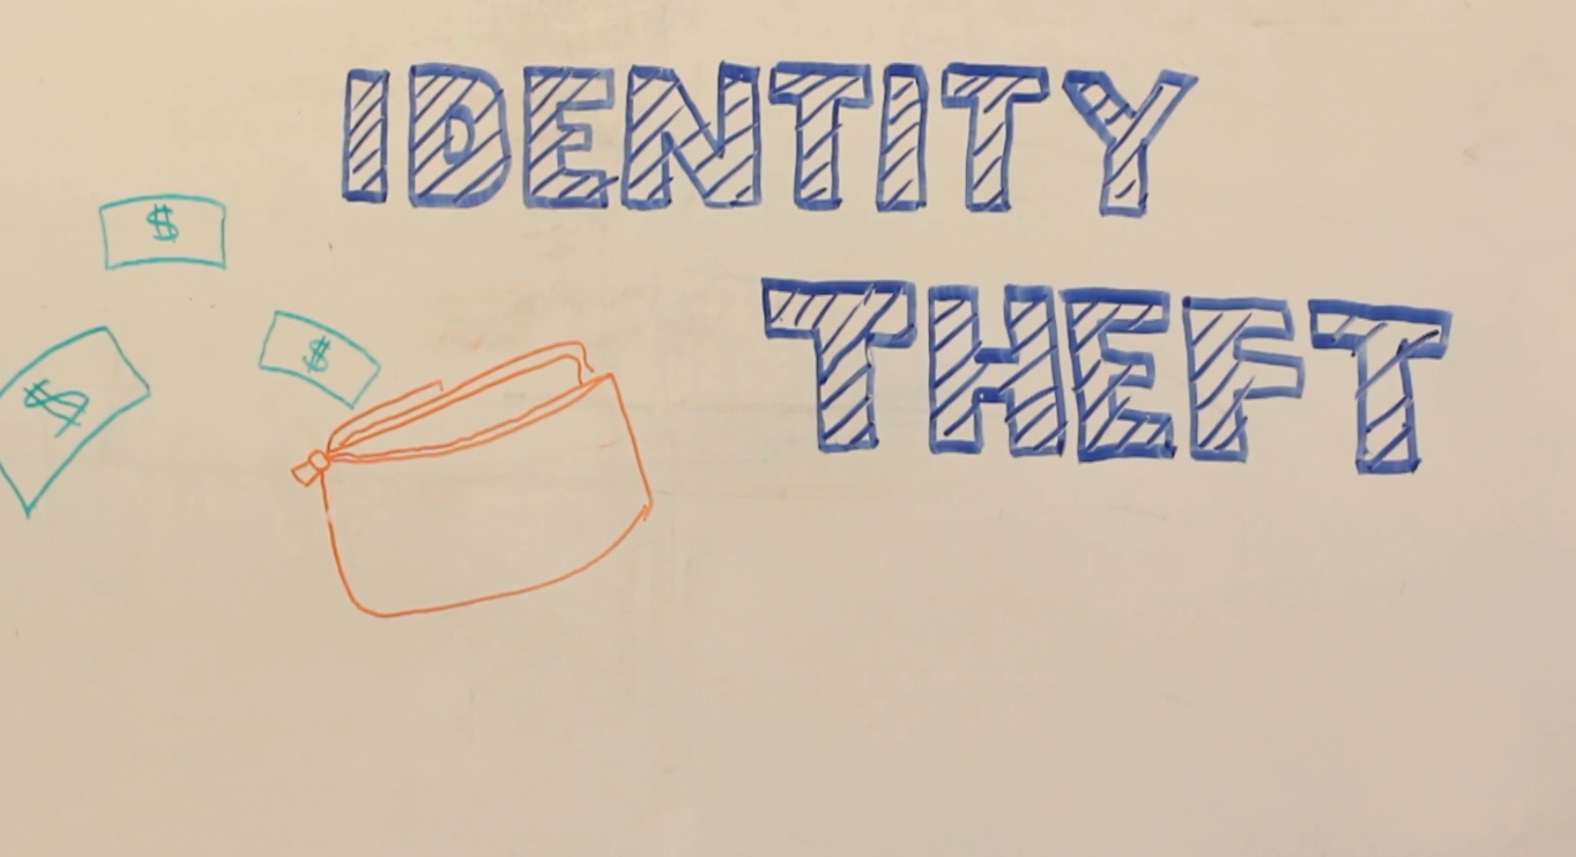 2014 Take Action High School Video Contest, 1st Place: “Identity Theft”